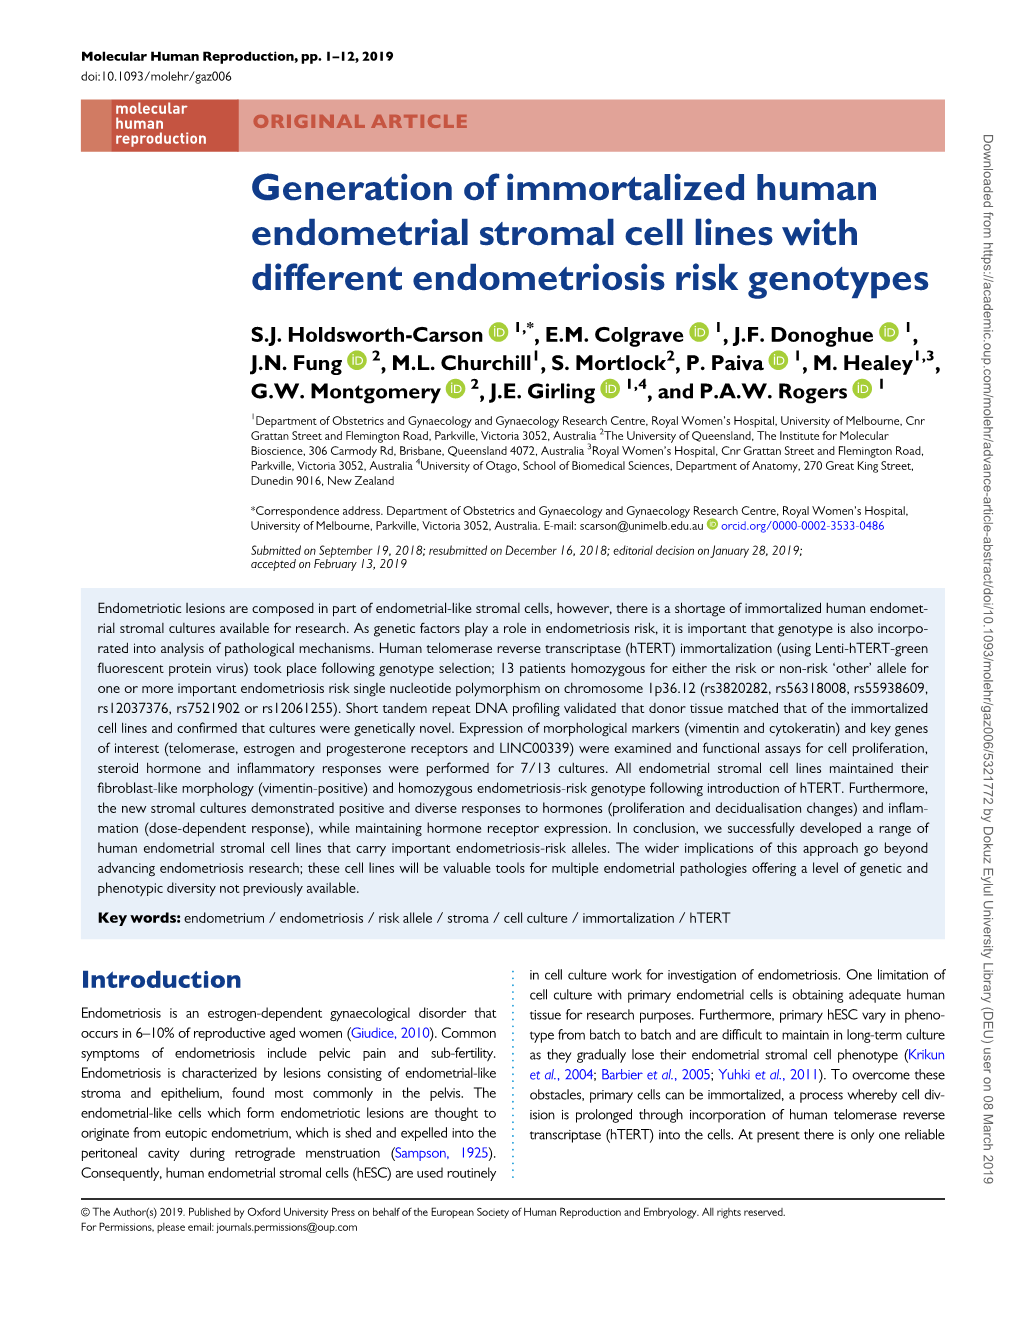 Generation of Immortalized Human Endometrial Stromal Cell Lines with Different Endometriosis Risk Genotypes. Holdsworth-Carson SJ